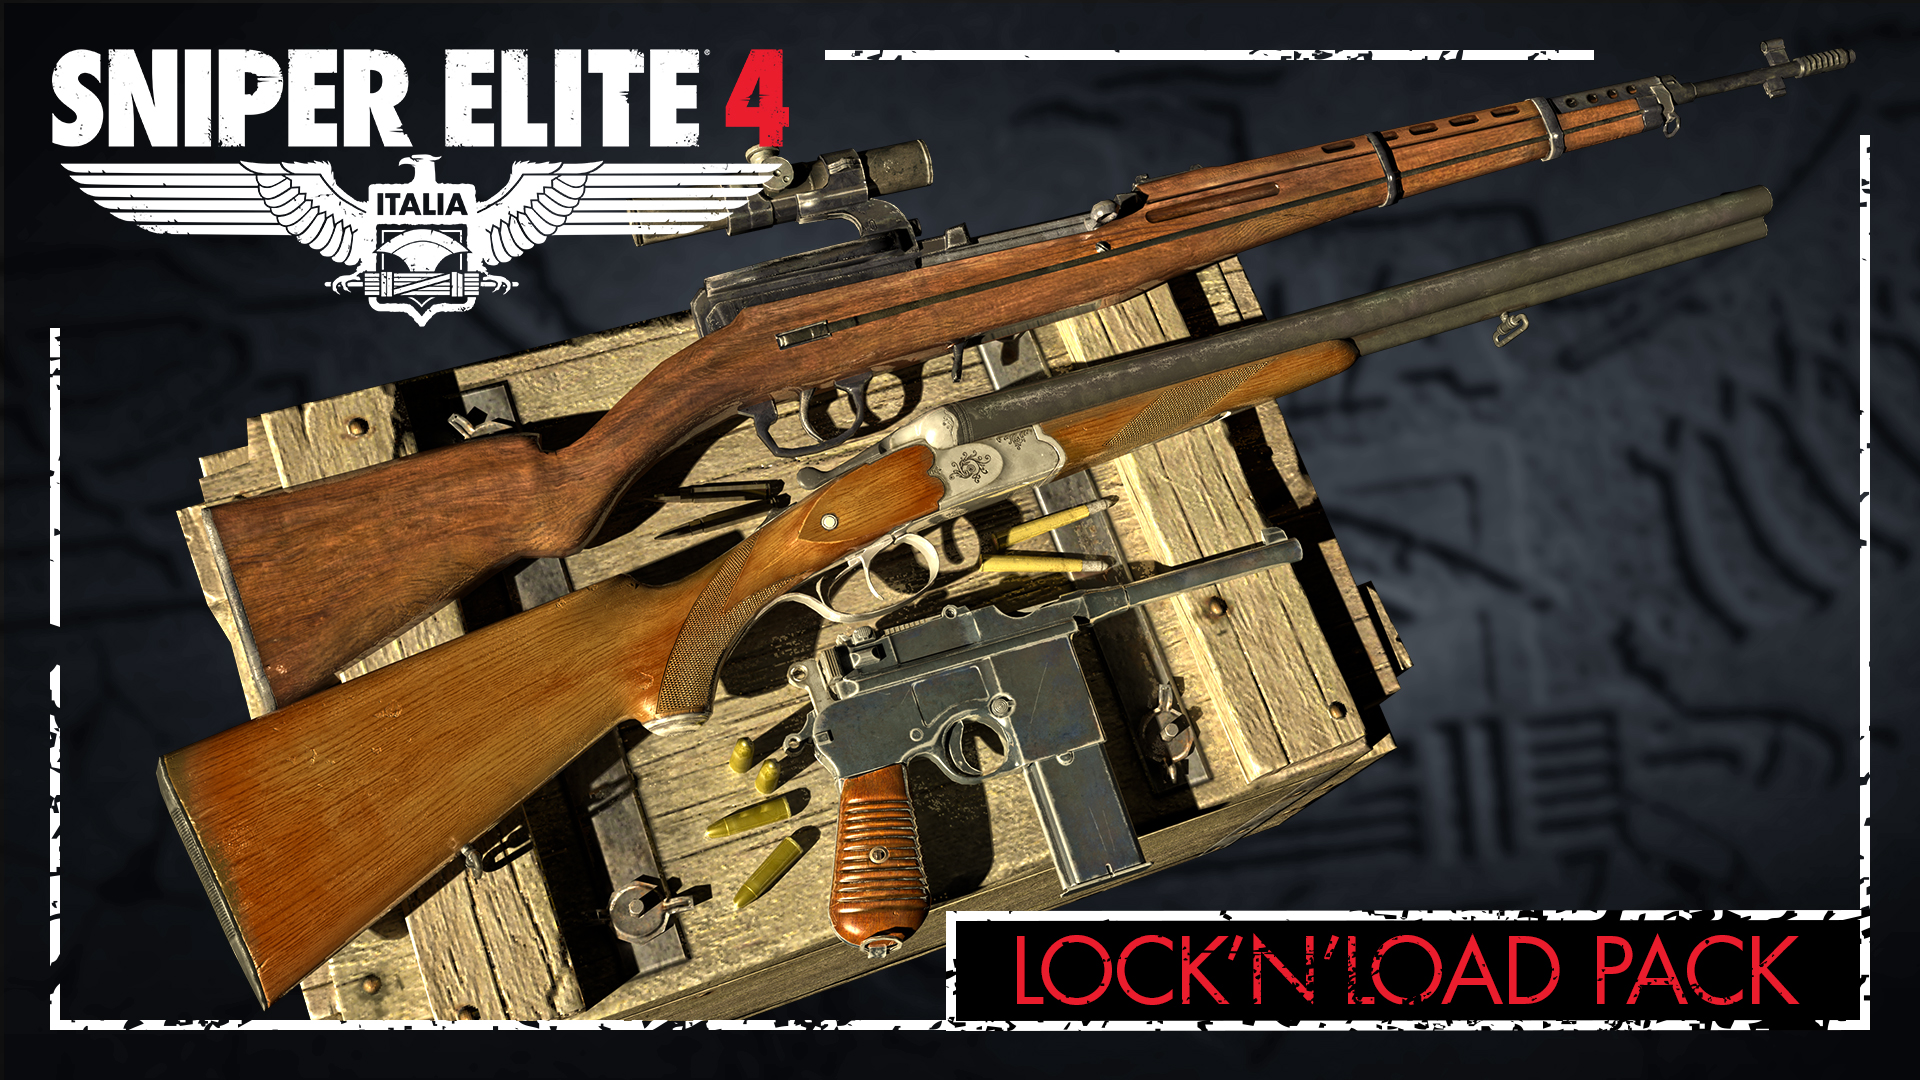 [$ 4.51] Sniper Elite 4 - Lock and Load Weapons Pack DLC Steam CD Key